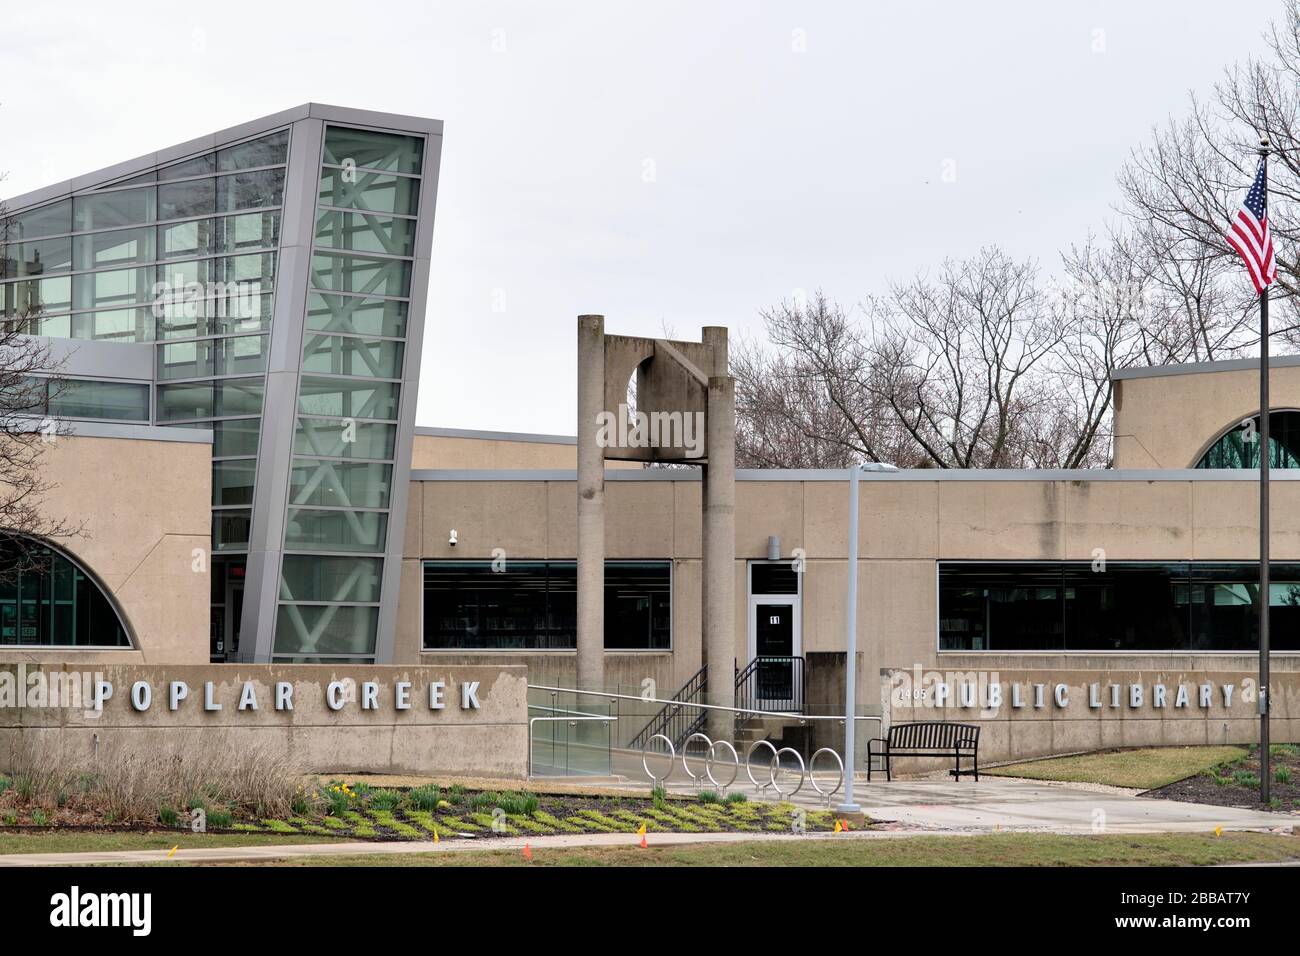 Streamwood, Illinois, USA. Not business as usual as public buildings including municipal centers such as libraries have been closed to public access. Stock Photo